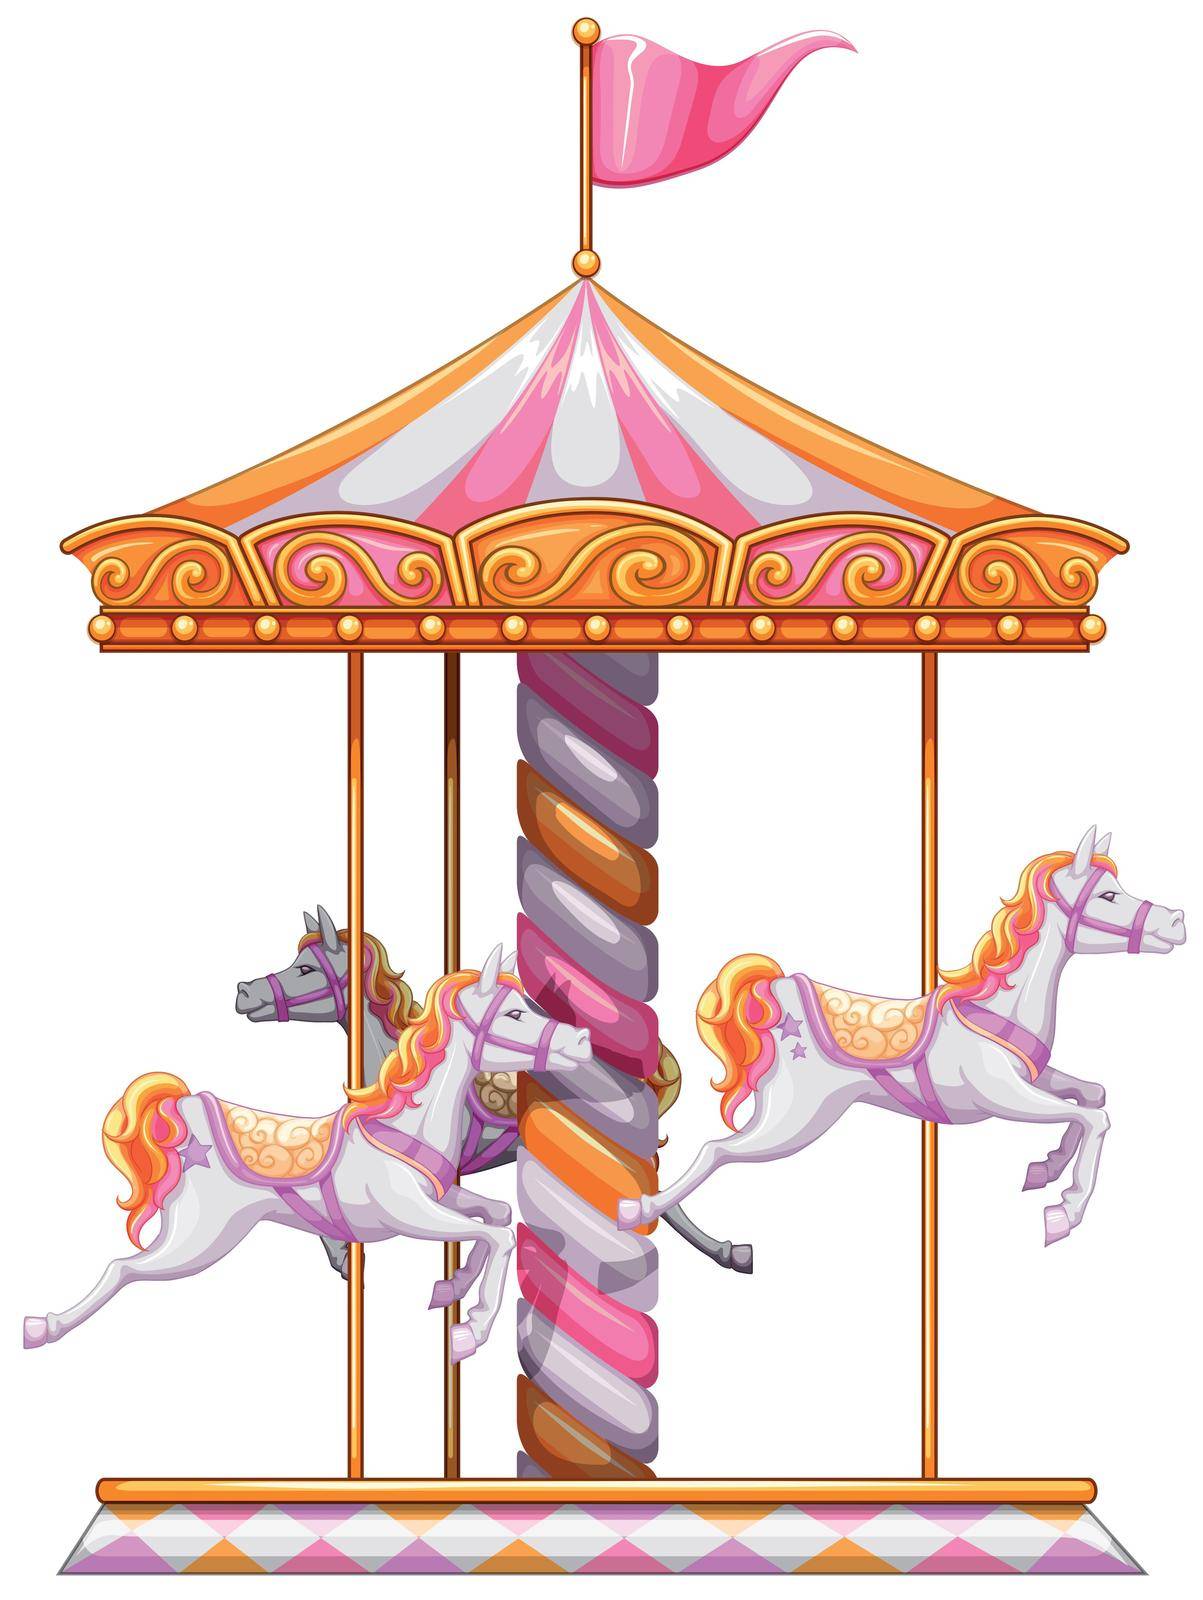 Illustration of a colourful merry-go-round on a white background